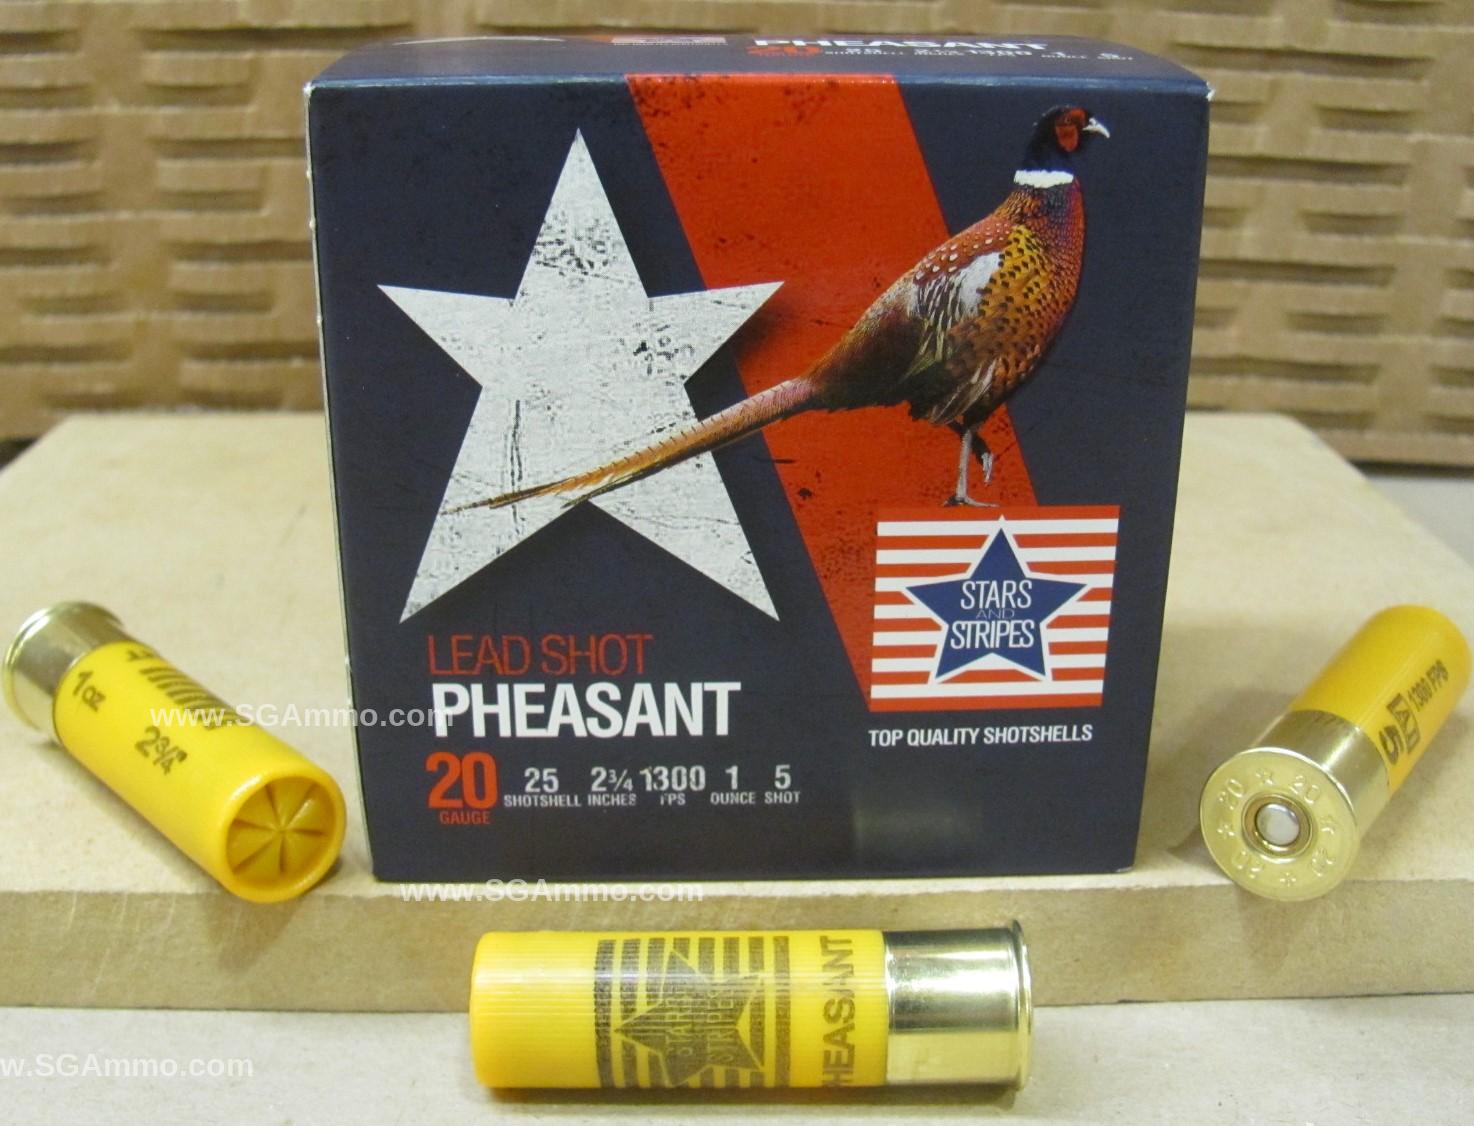 250 Round Case - 20 Gauge 2.75 Inch 1 Ounce Number 5 Lead Shot Pheasant Ammo by Stars and Stripes